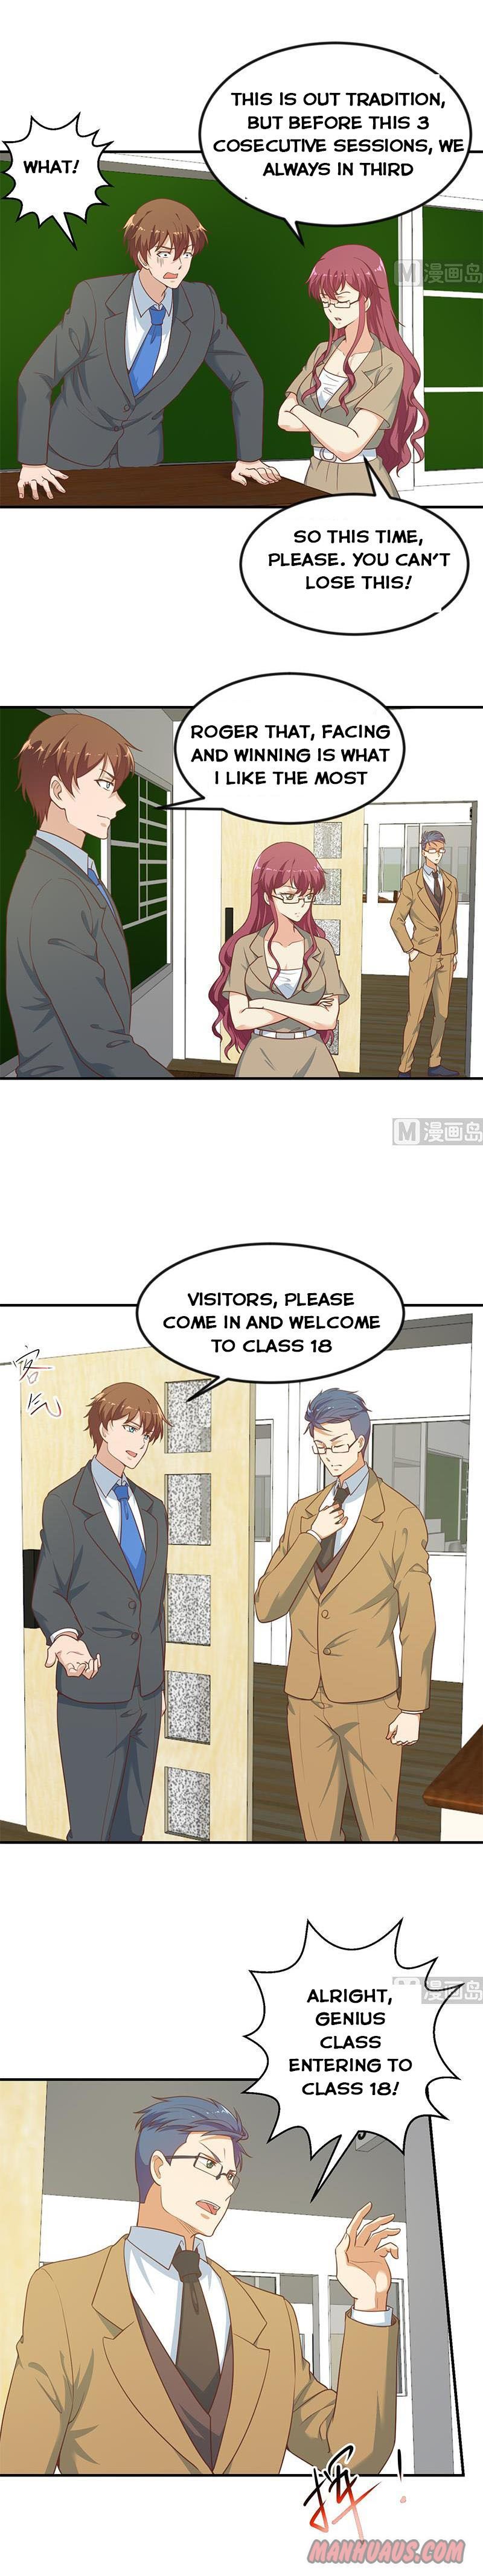 Cultivation Return on Campus Chapter 98 page 2